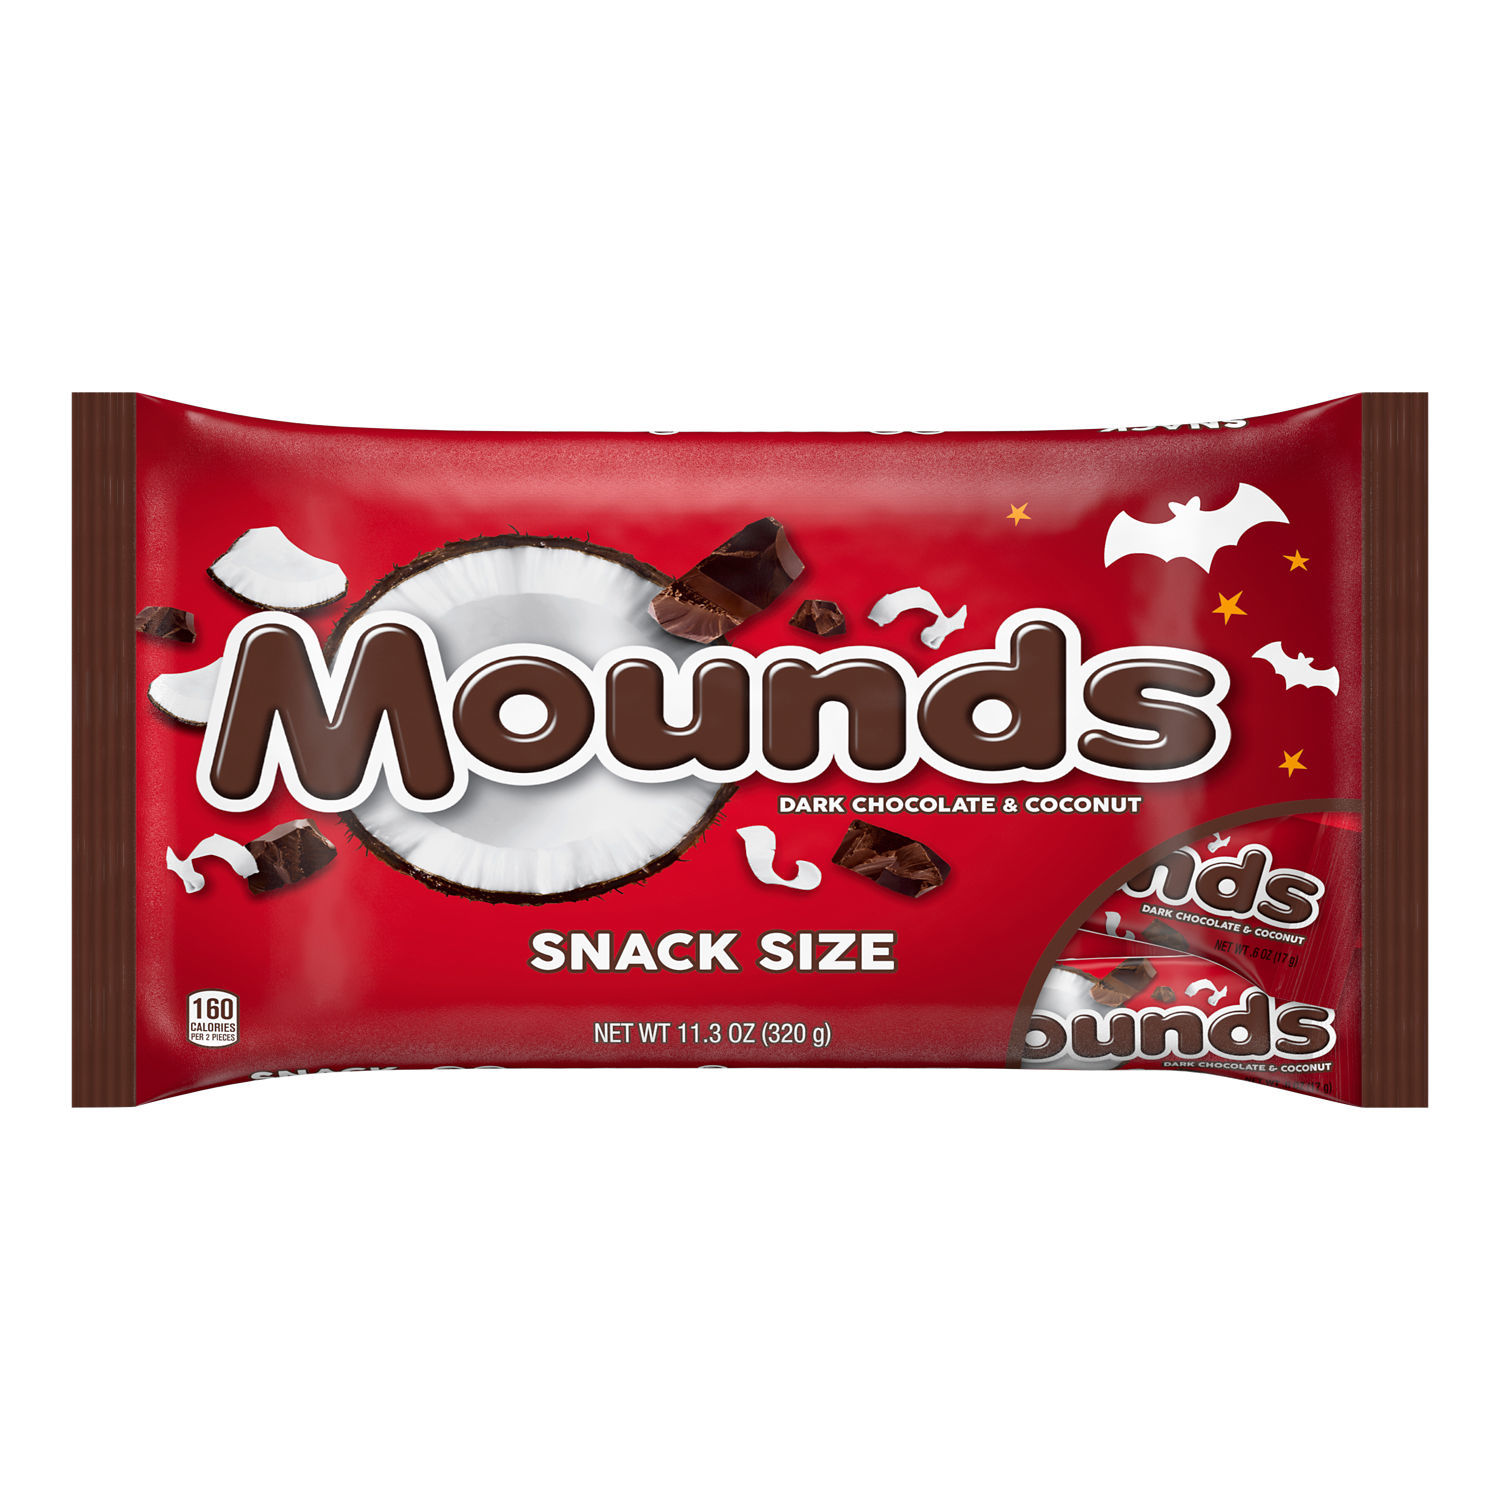 Mounds Dark Chocolate and Coconut Snack Size, Halloween Candy Bars Bag, 11.3 oz - image 1 of 7